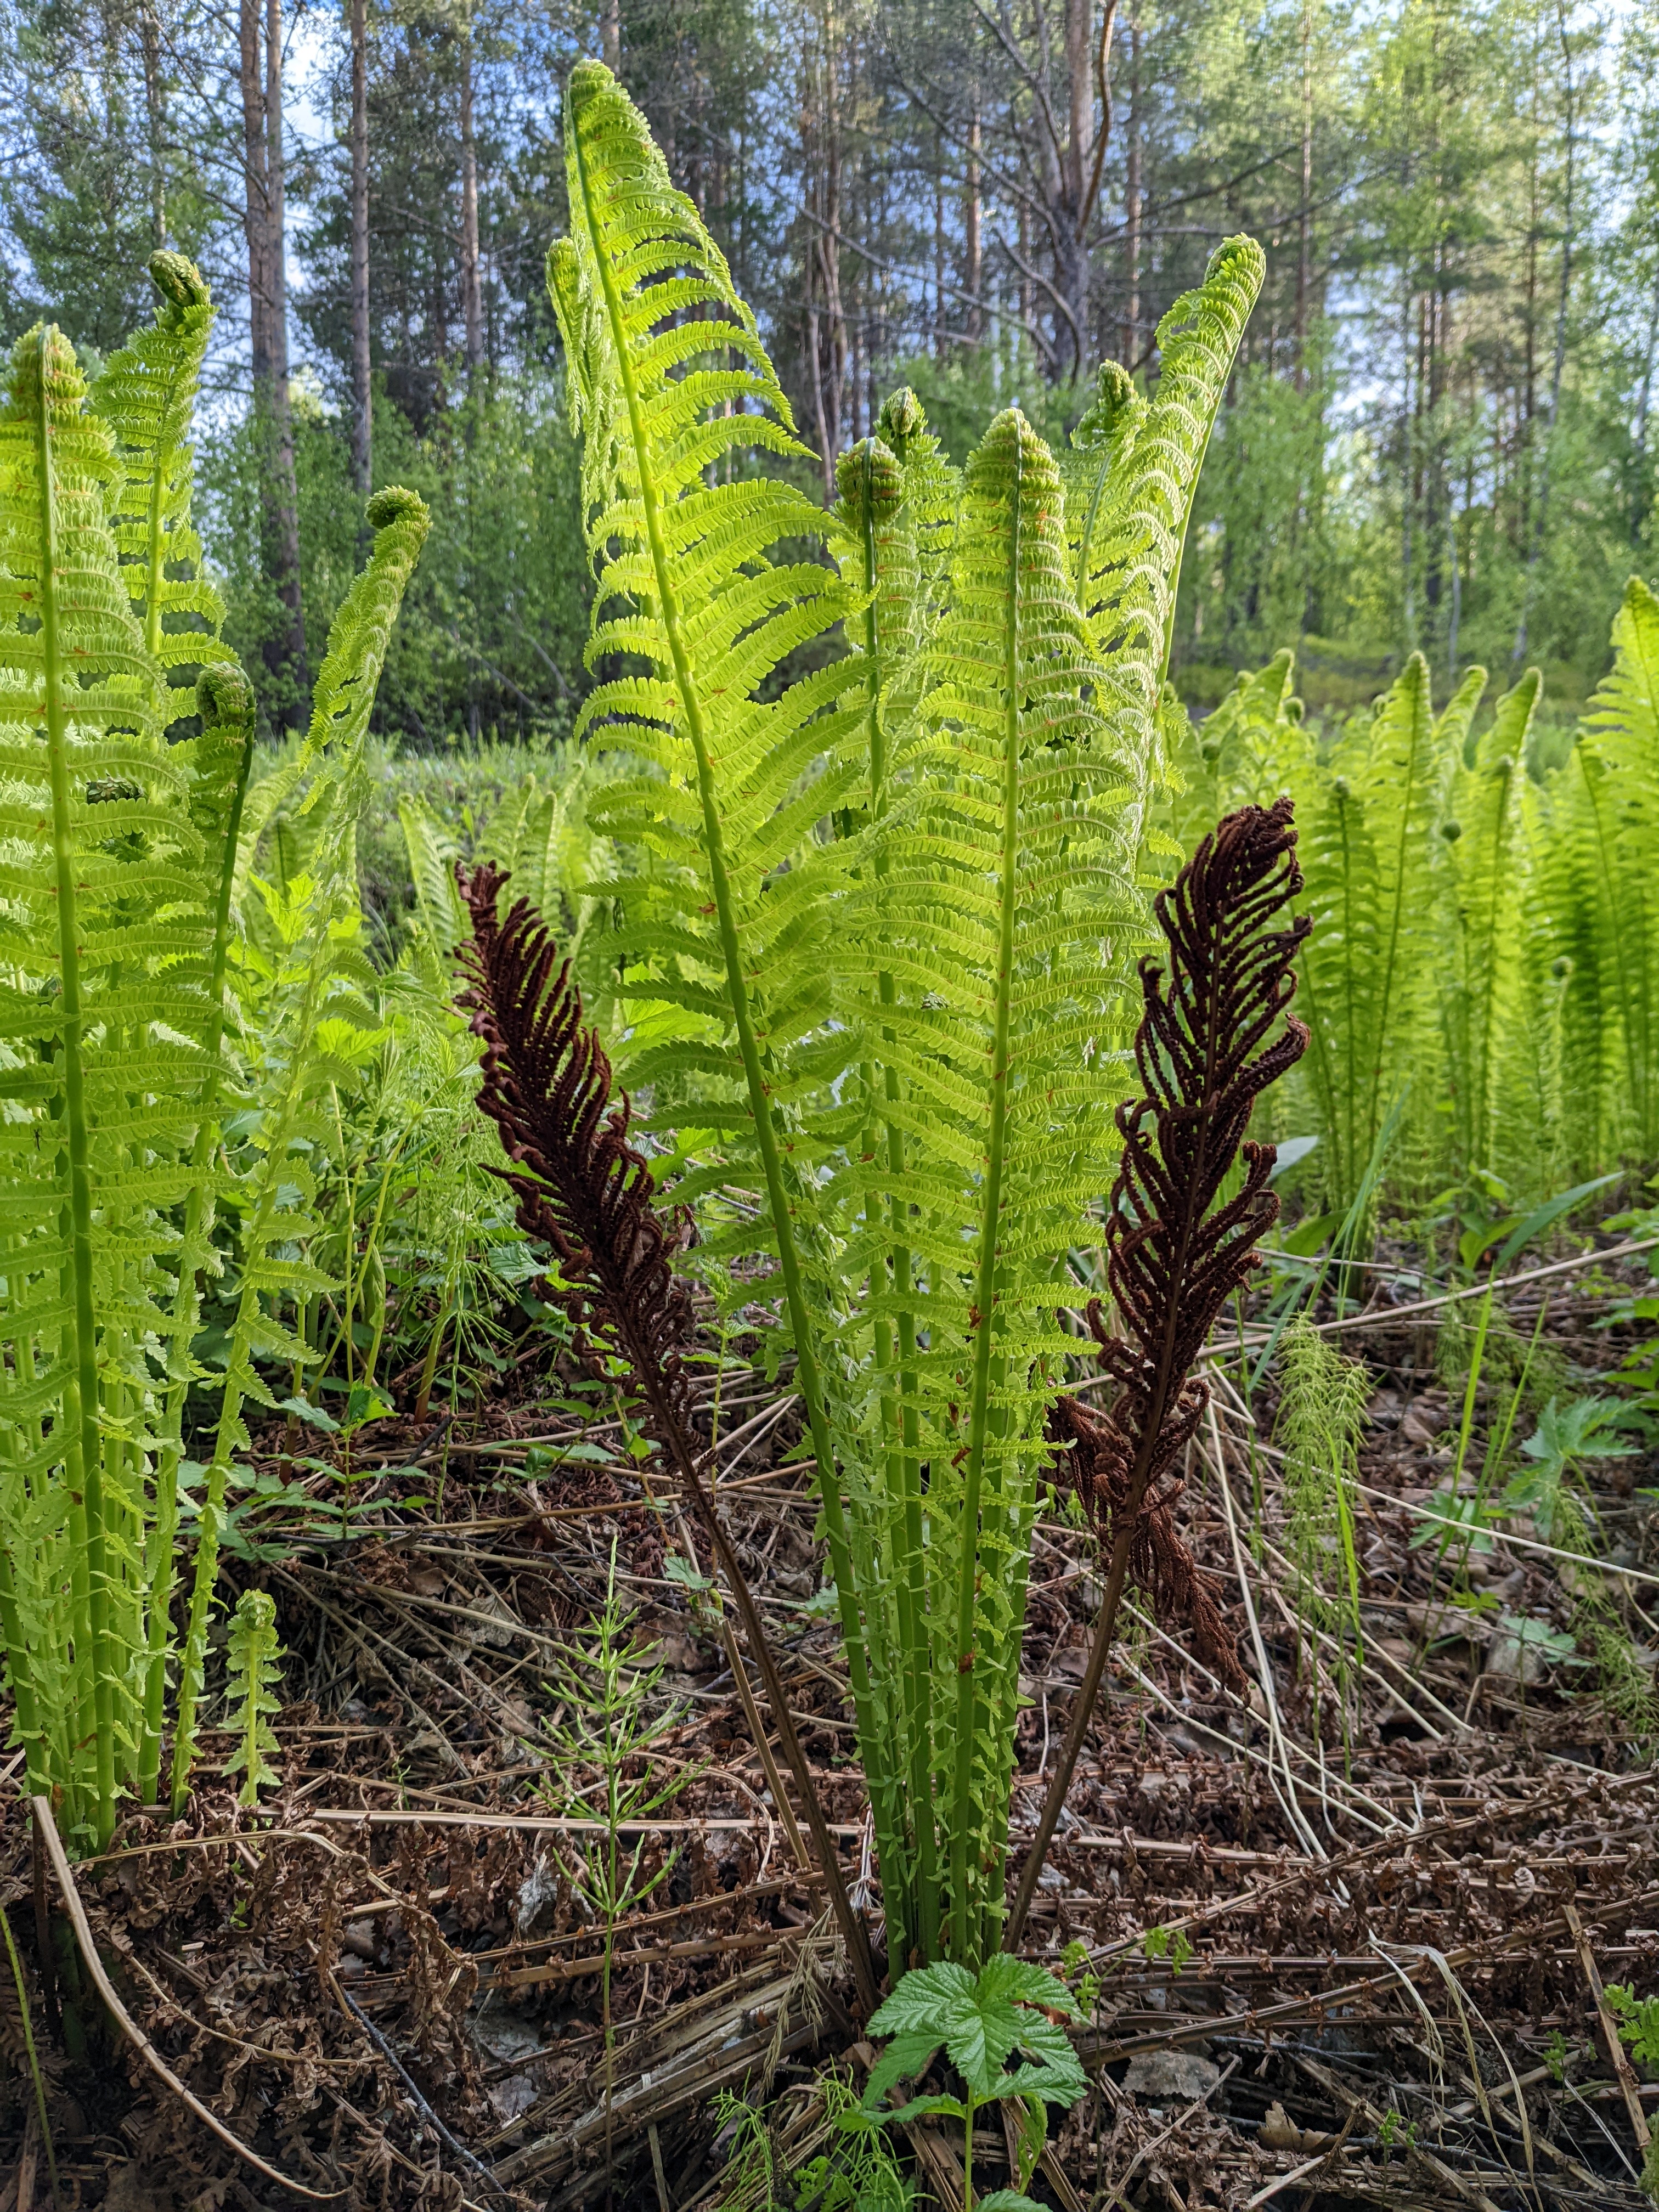 a cluster of sword fern leaves (or similar) standing straight up, with two brown leaves sticking up on the sides